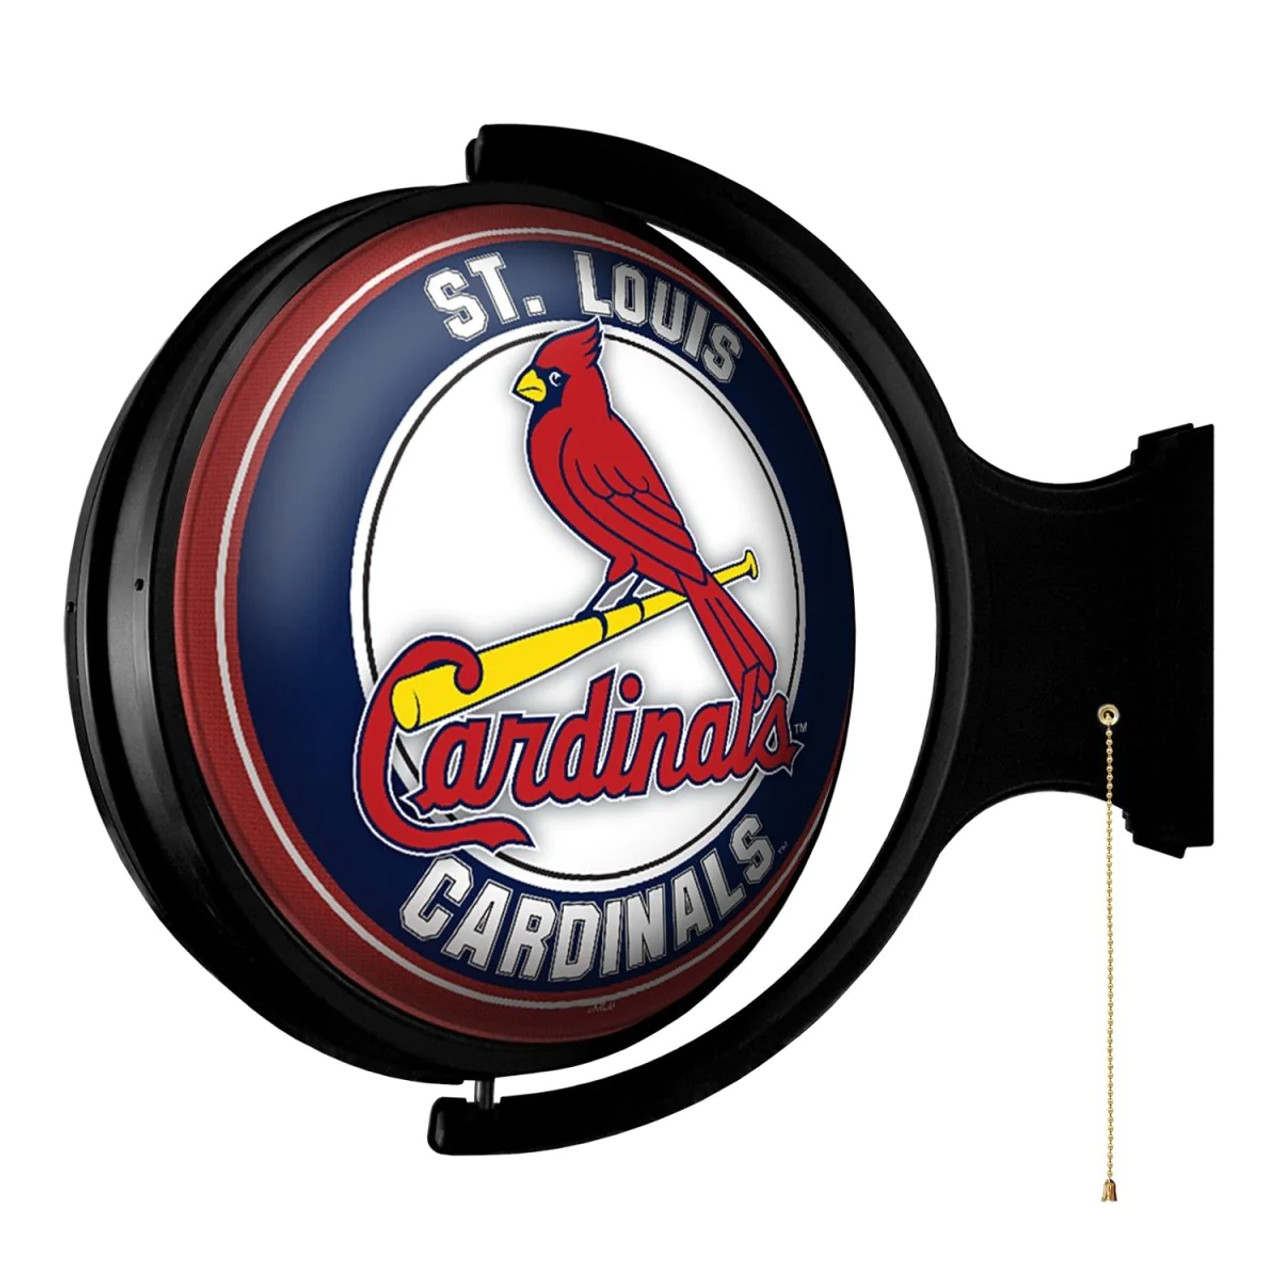 MBSTLC-115-01, STL, St Louis, Cards, Cardinals,  Original, Round, Rotating, Lighted, Wall, Sign, The Fan-Brand, 704384952718, LED